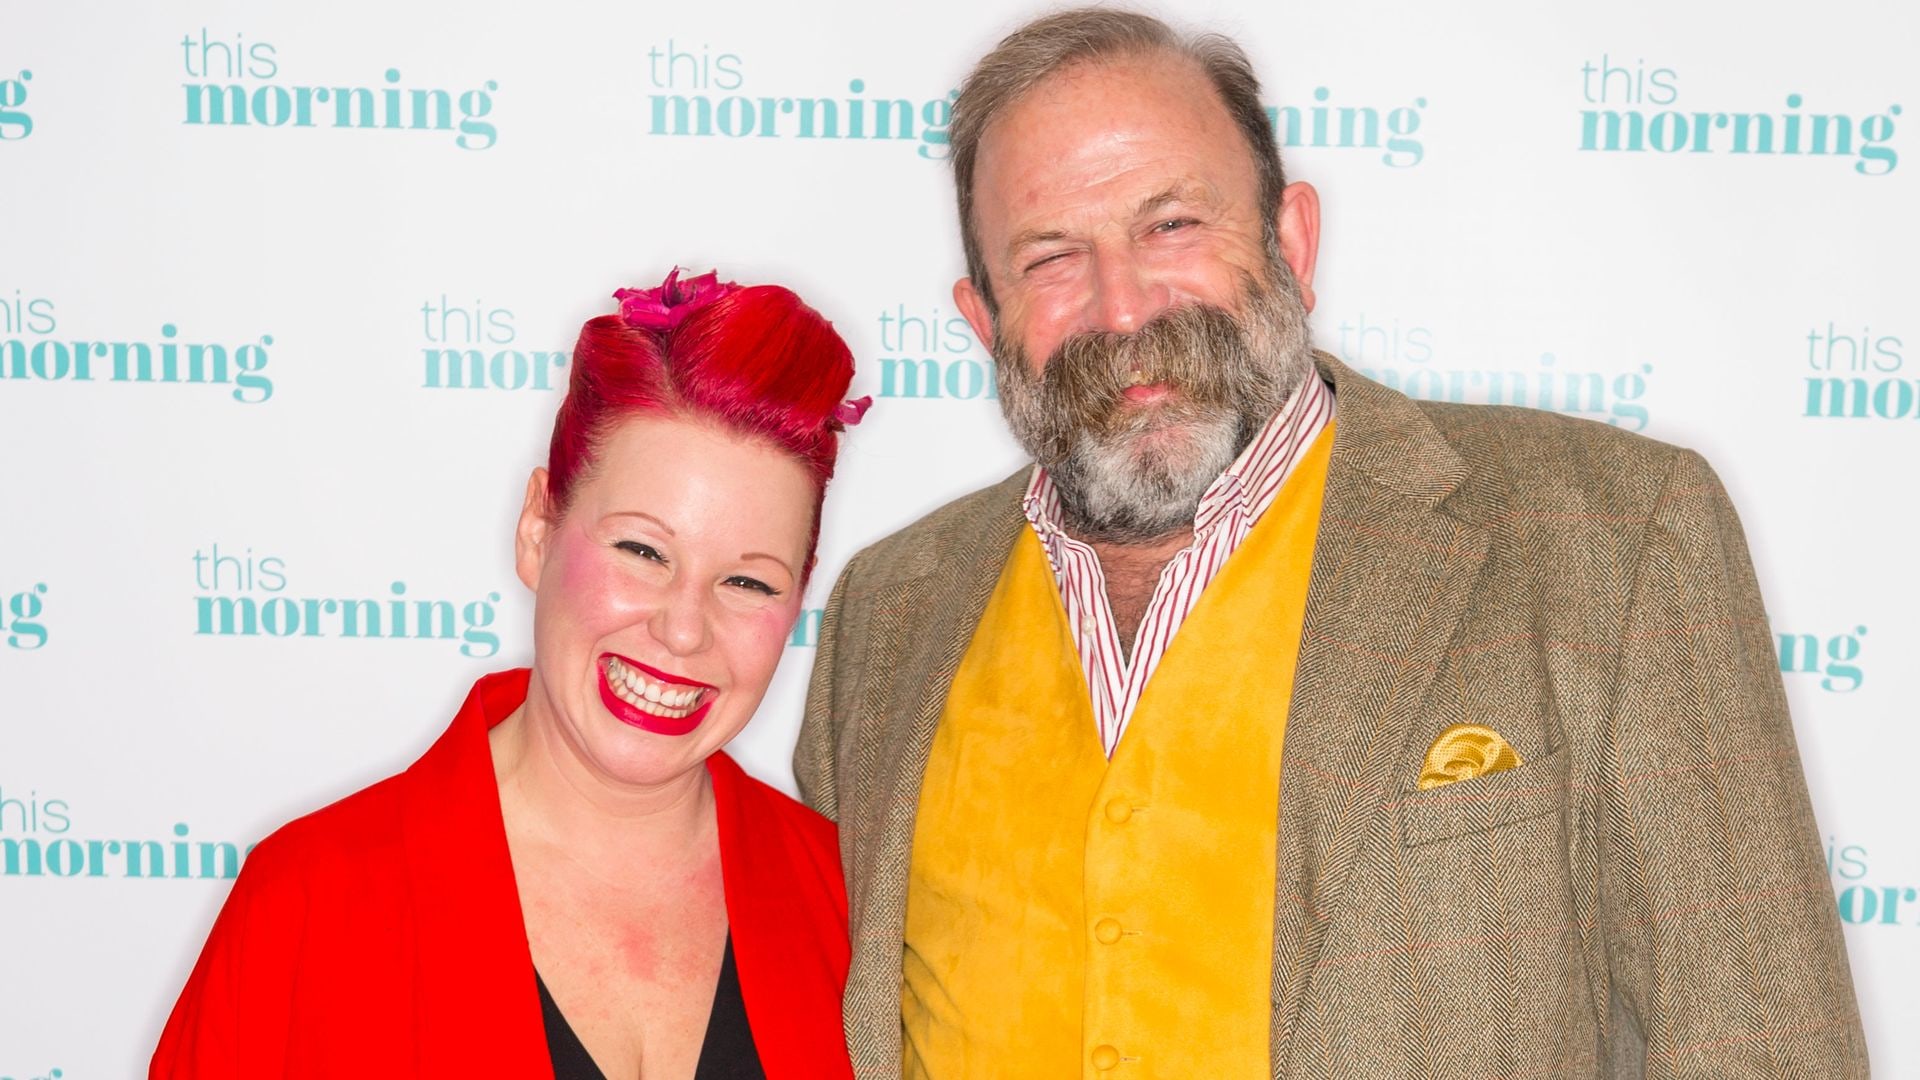 Angel and Dick Strawbridge pose for a photo on the This Morning studios